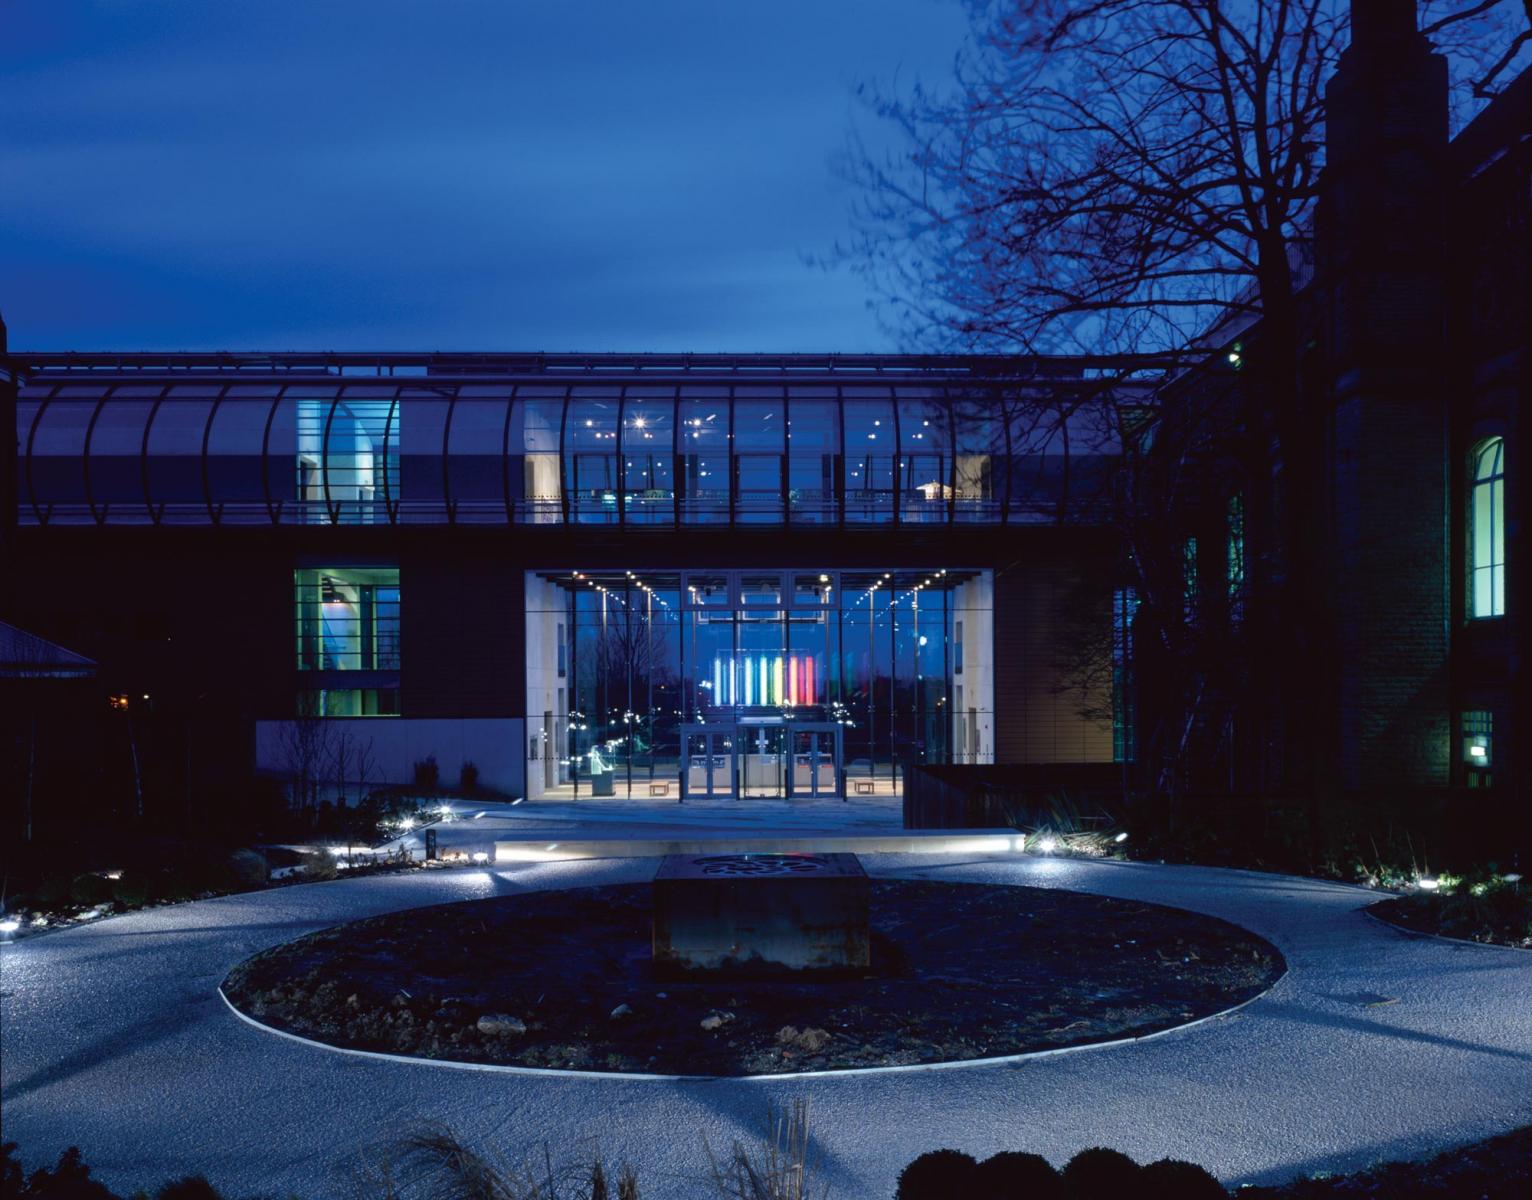 Gallery Oldham - Exterior view across park at night